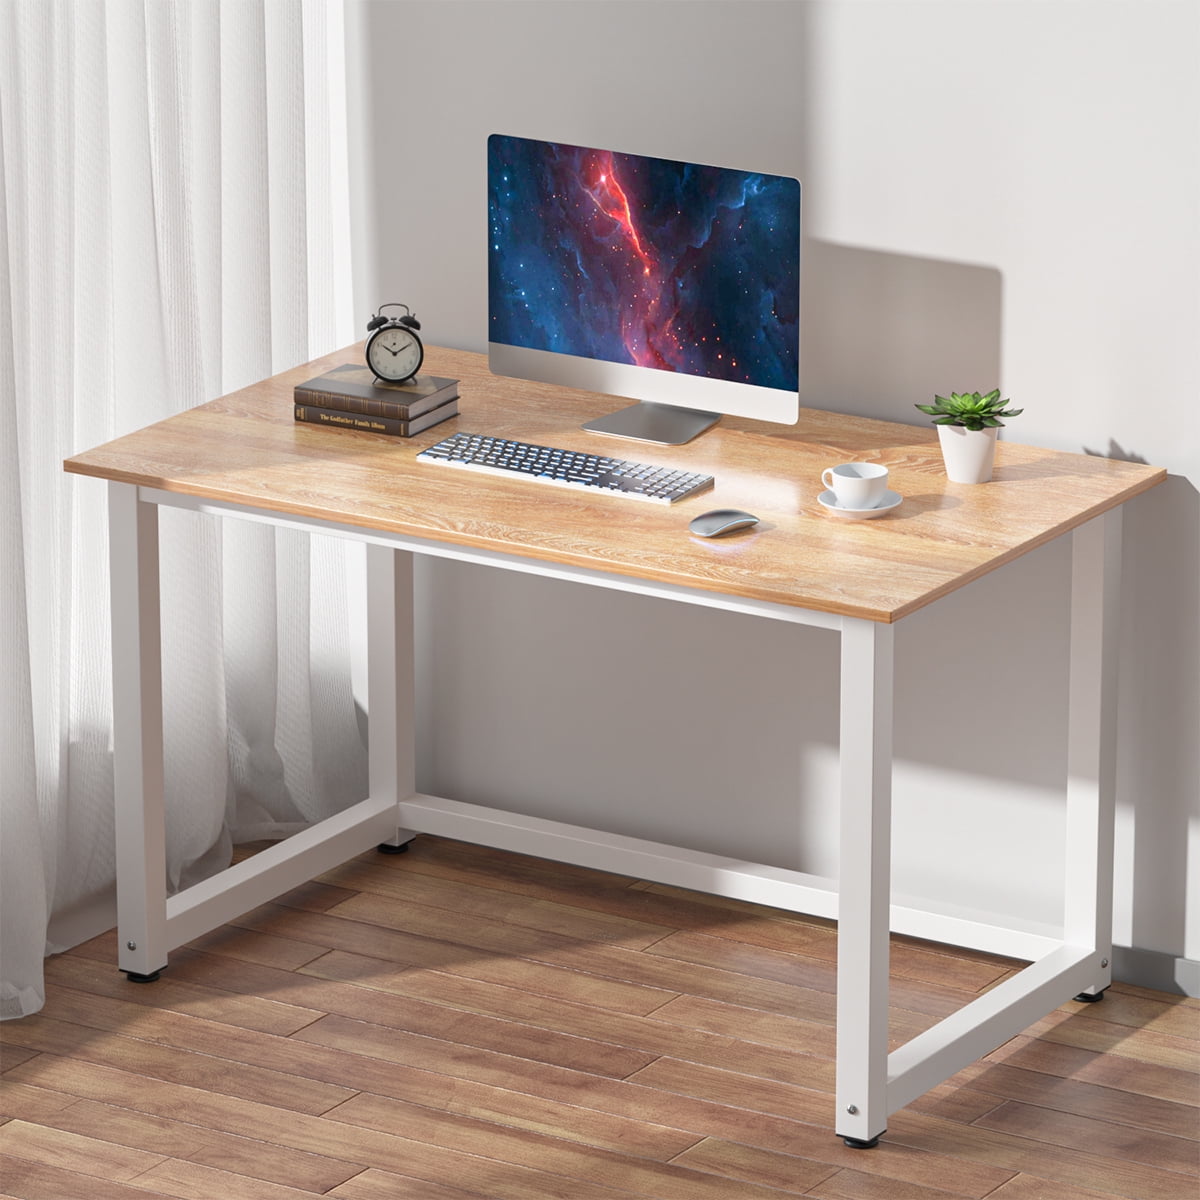 Wooden Computer Desk PC Laptop Table Home Office Study Work Station Furniture 